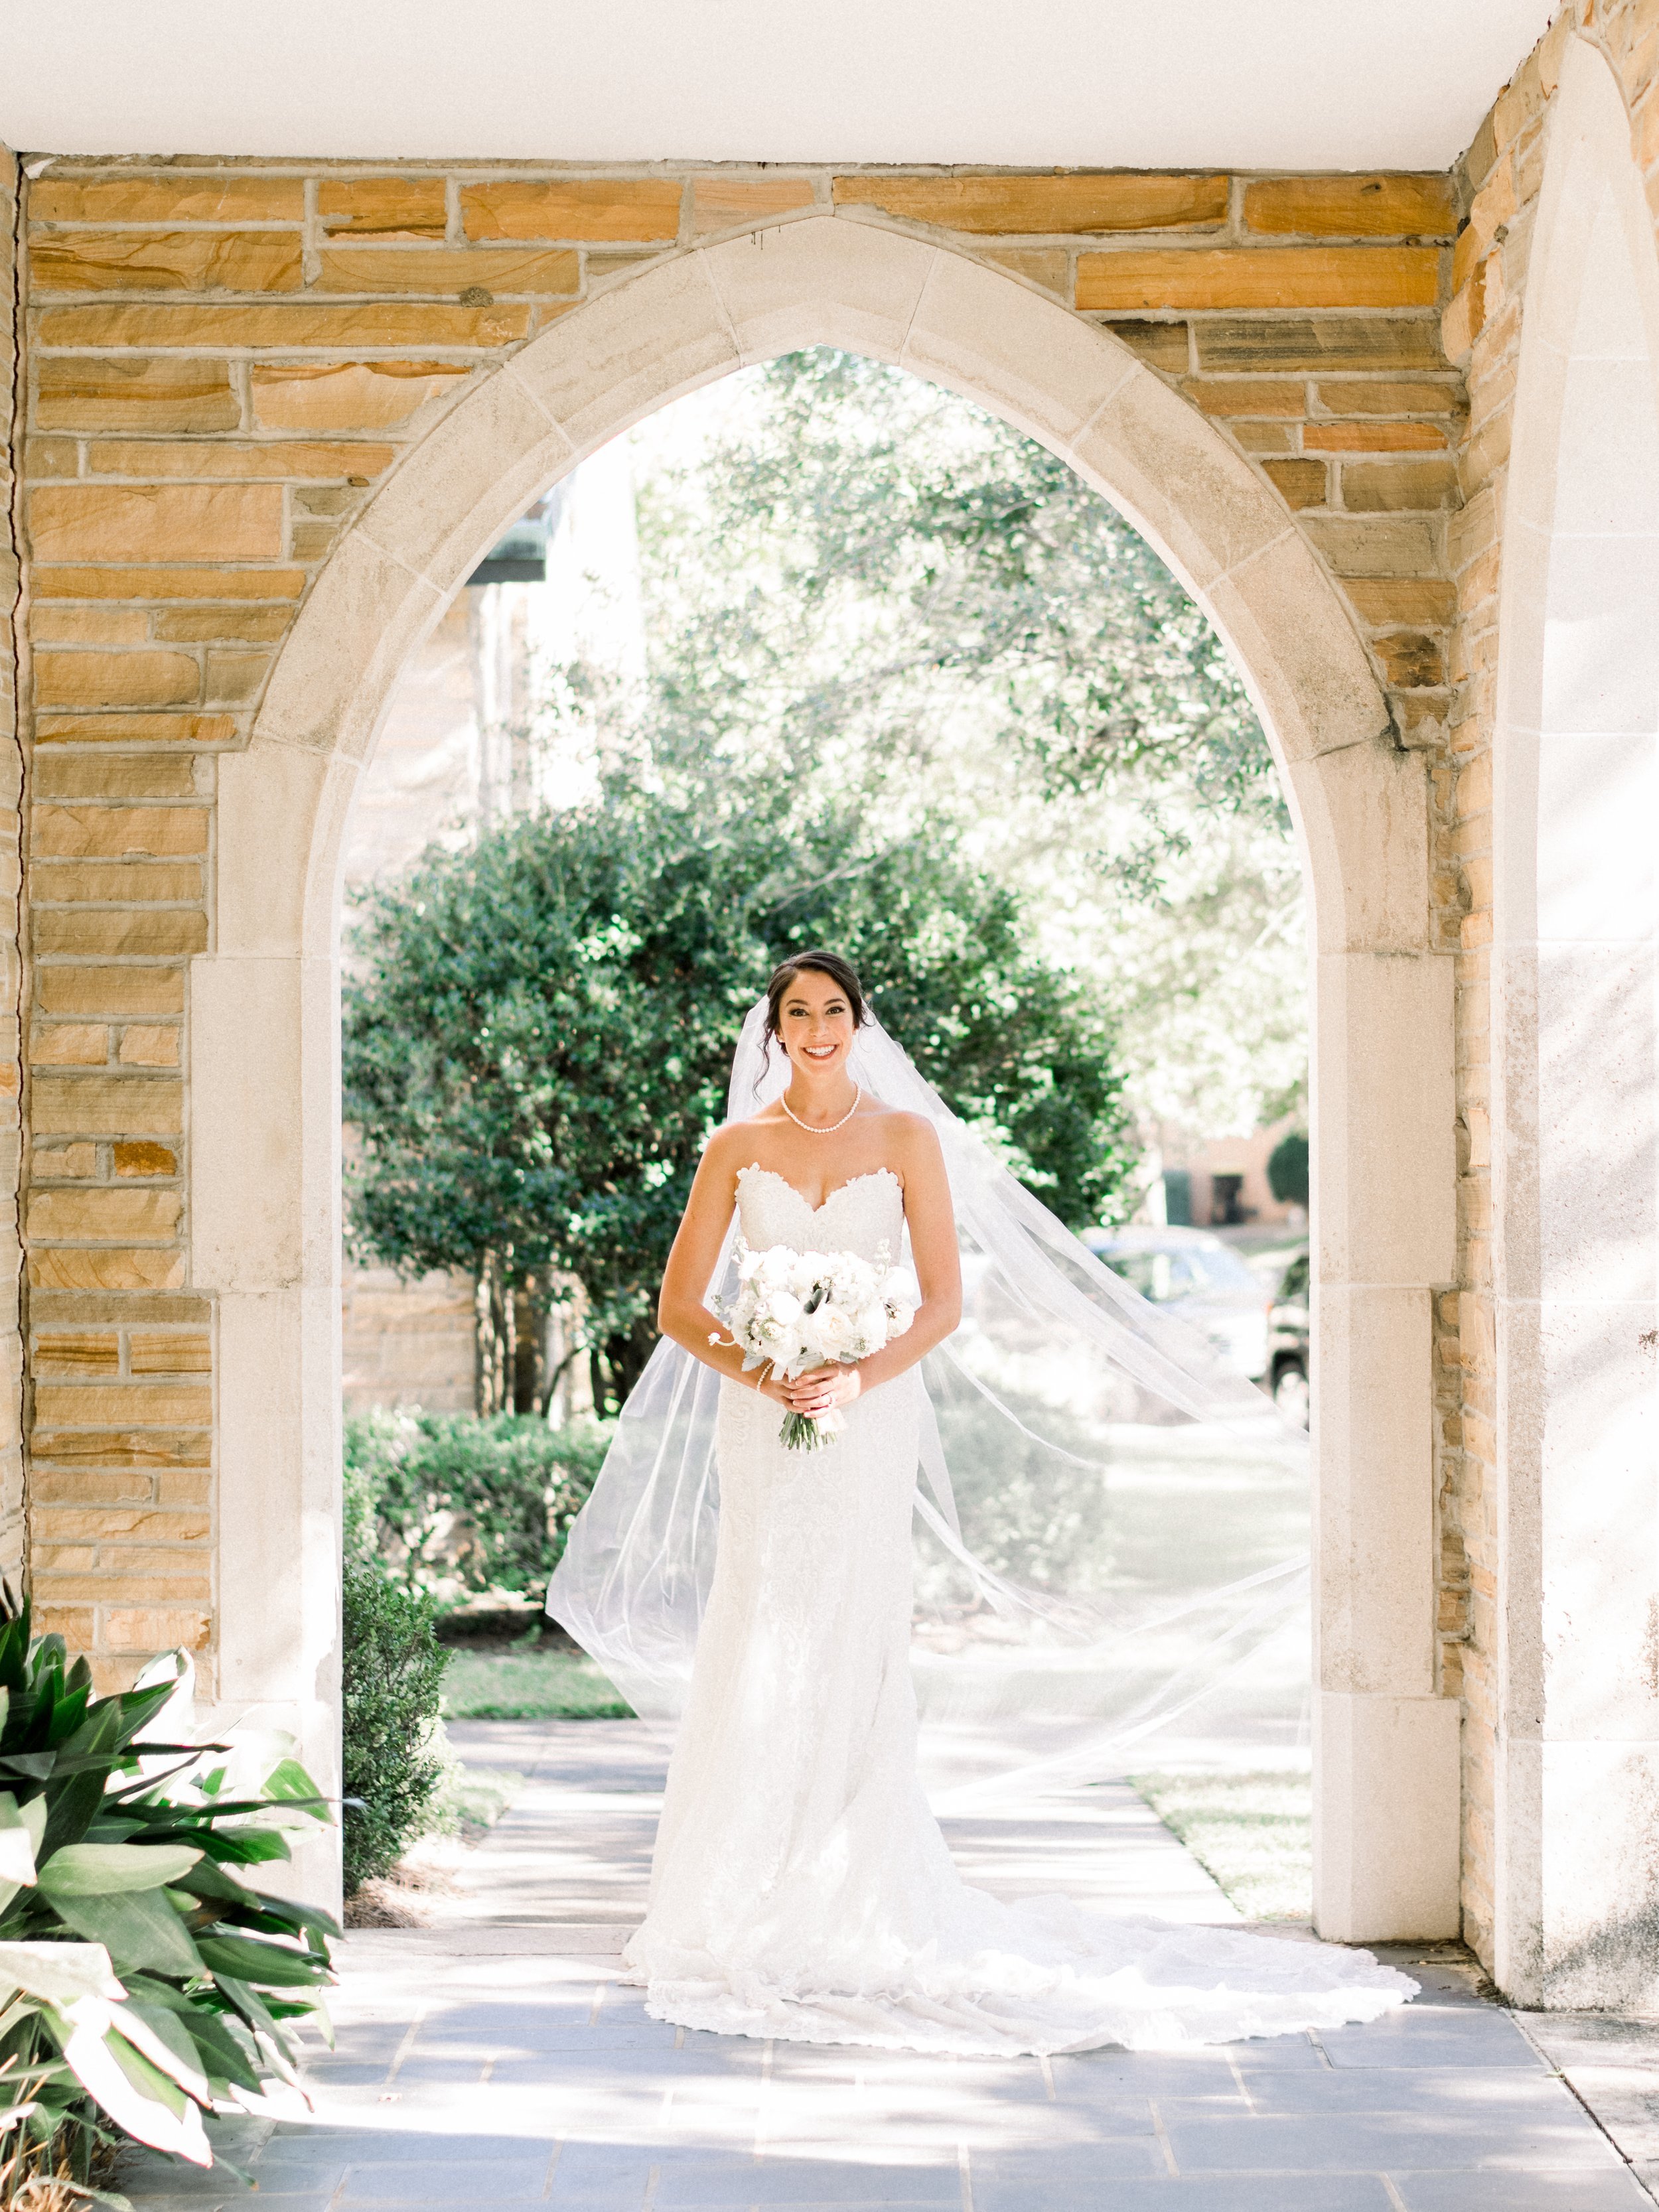 ivory-and-beau-blog-down-for-the-gown-grayson-real-bride-real-wedding-blog-southern-bride-maggie-sottero-wedding-dress-bridal-gown-wedding-gown-bridal-shop-bridal-boutique-savannah-georgia-Pinyan_0382.jpg